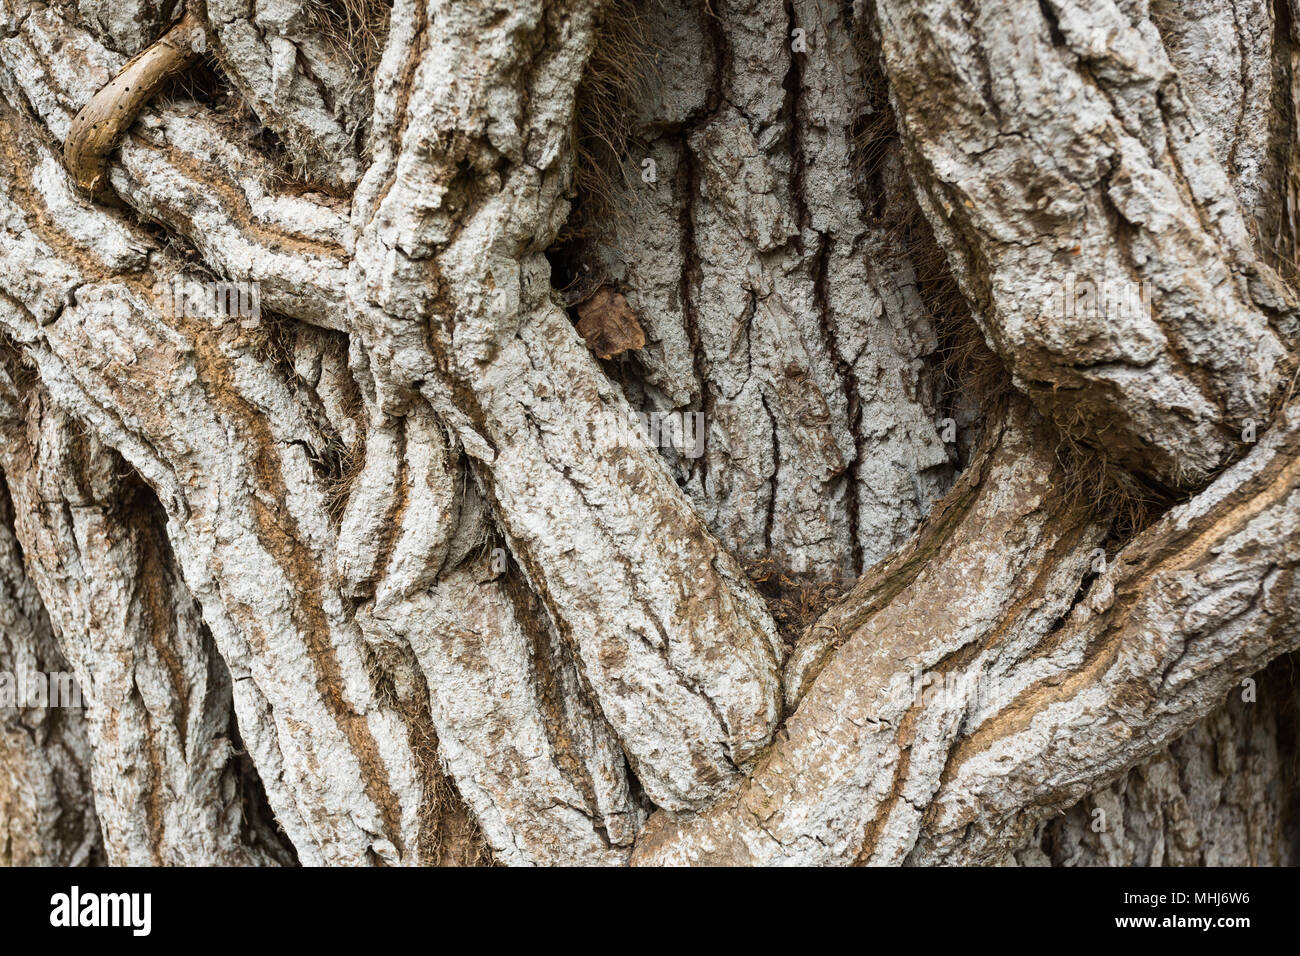 Close up detail of gnarly, knobbly, grey, twisted, winding, climbing vine stems wrapped around old tree on Brownsea Island, near Poole, Dorset UK Stock Photo